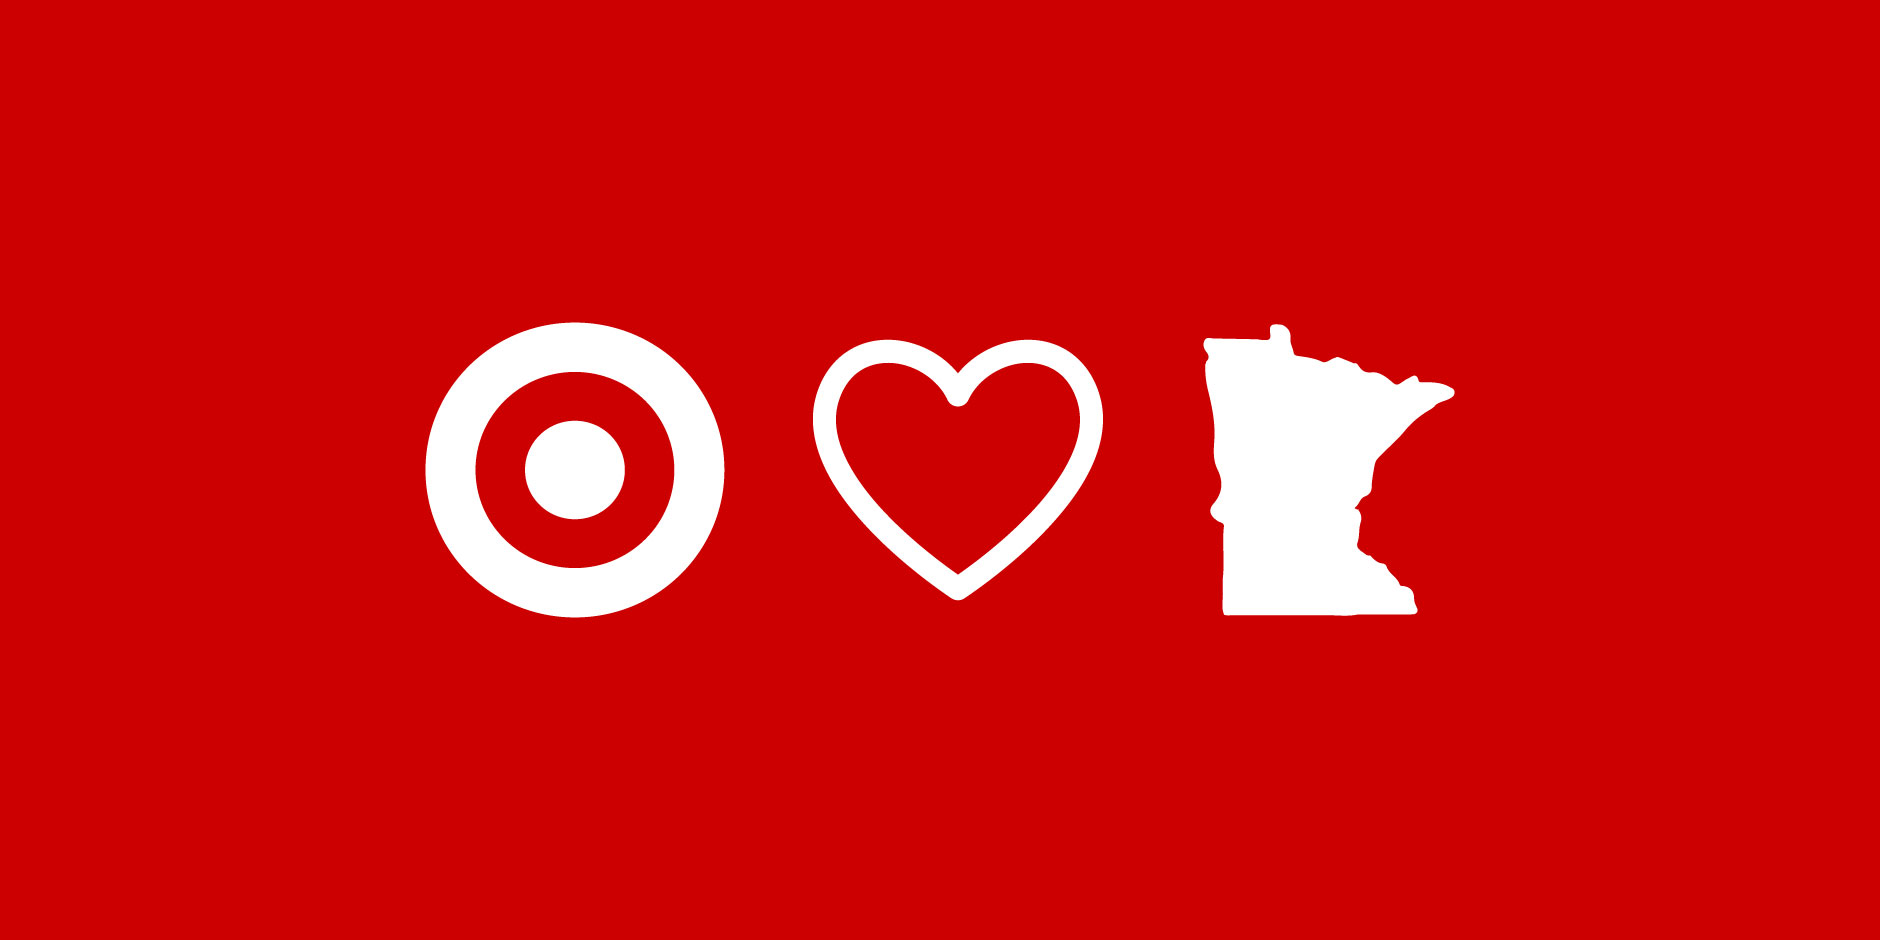 Three white icons on a red background. From left: Target’s Bullseye logo, a heart and the state of Minnesota.